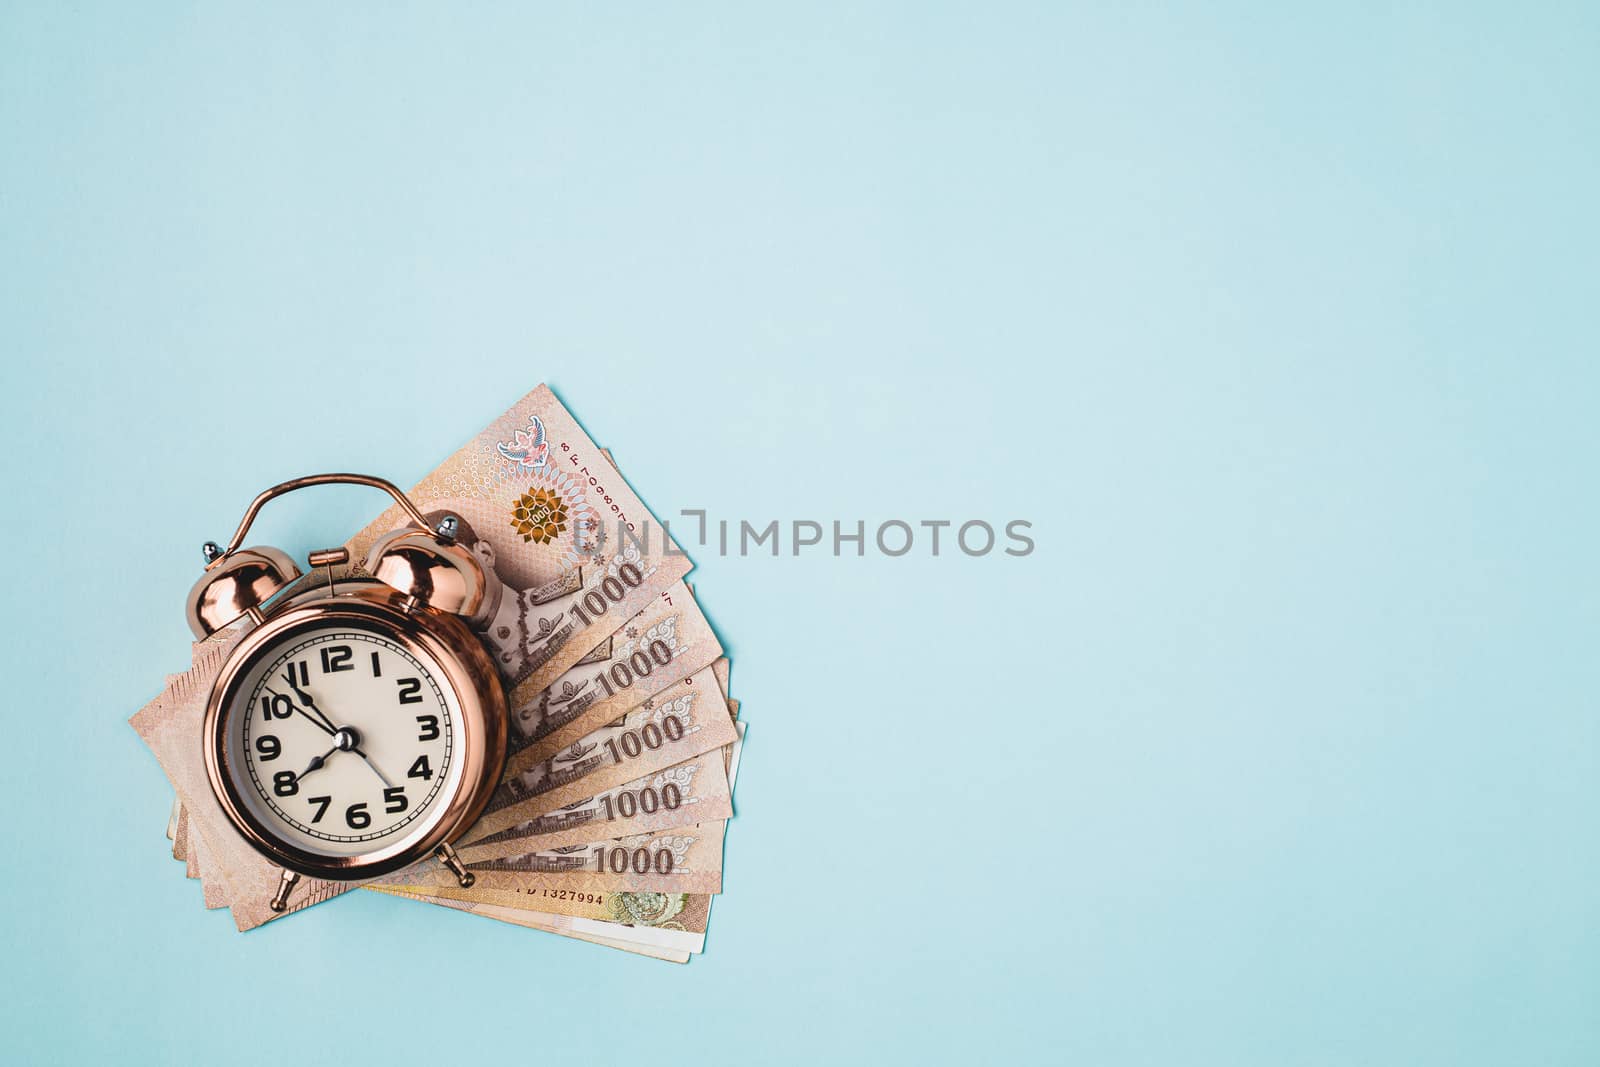 Bell alarm clock  with Thai currency, 1000 Baht, money banknote of Thailand on blue background for business, finance and time management concept